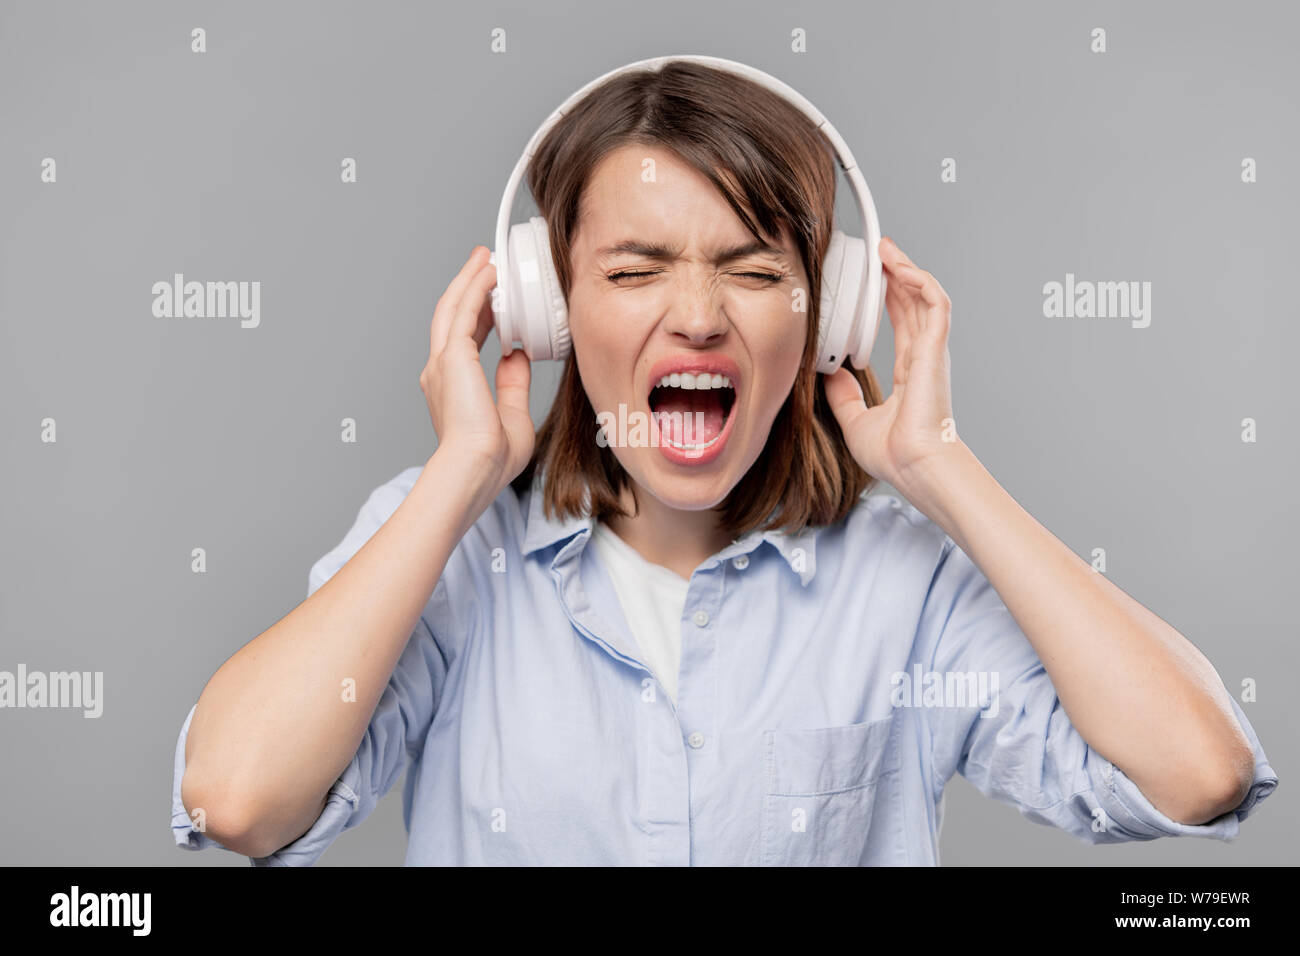 Furious young woman in headphones screaming loudly Stock Photo